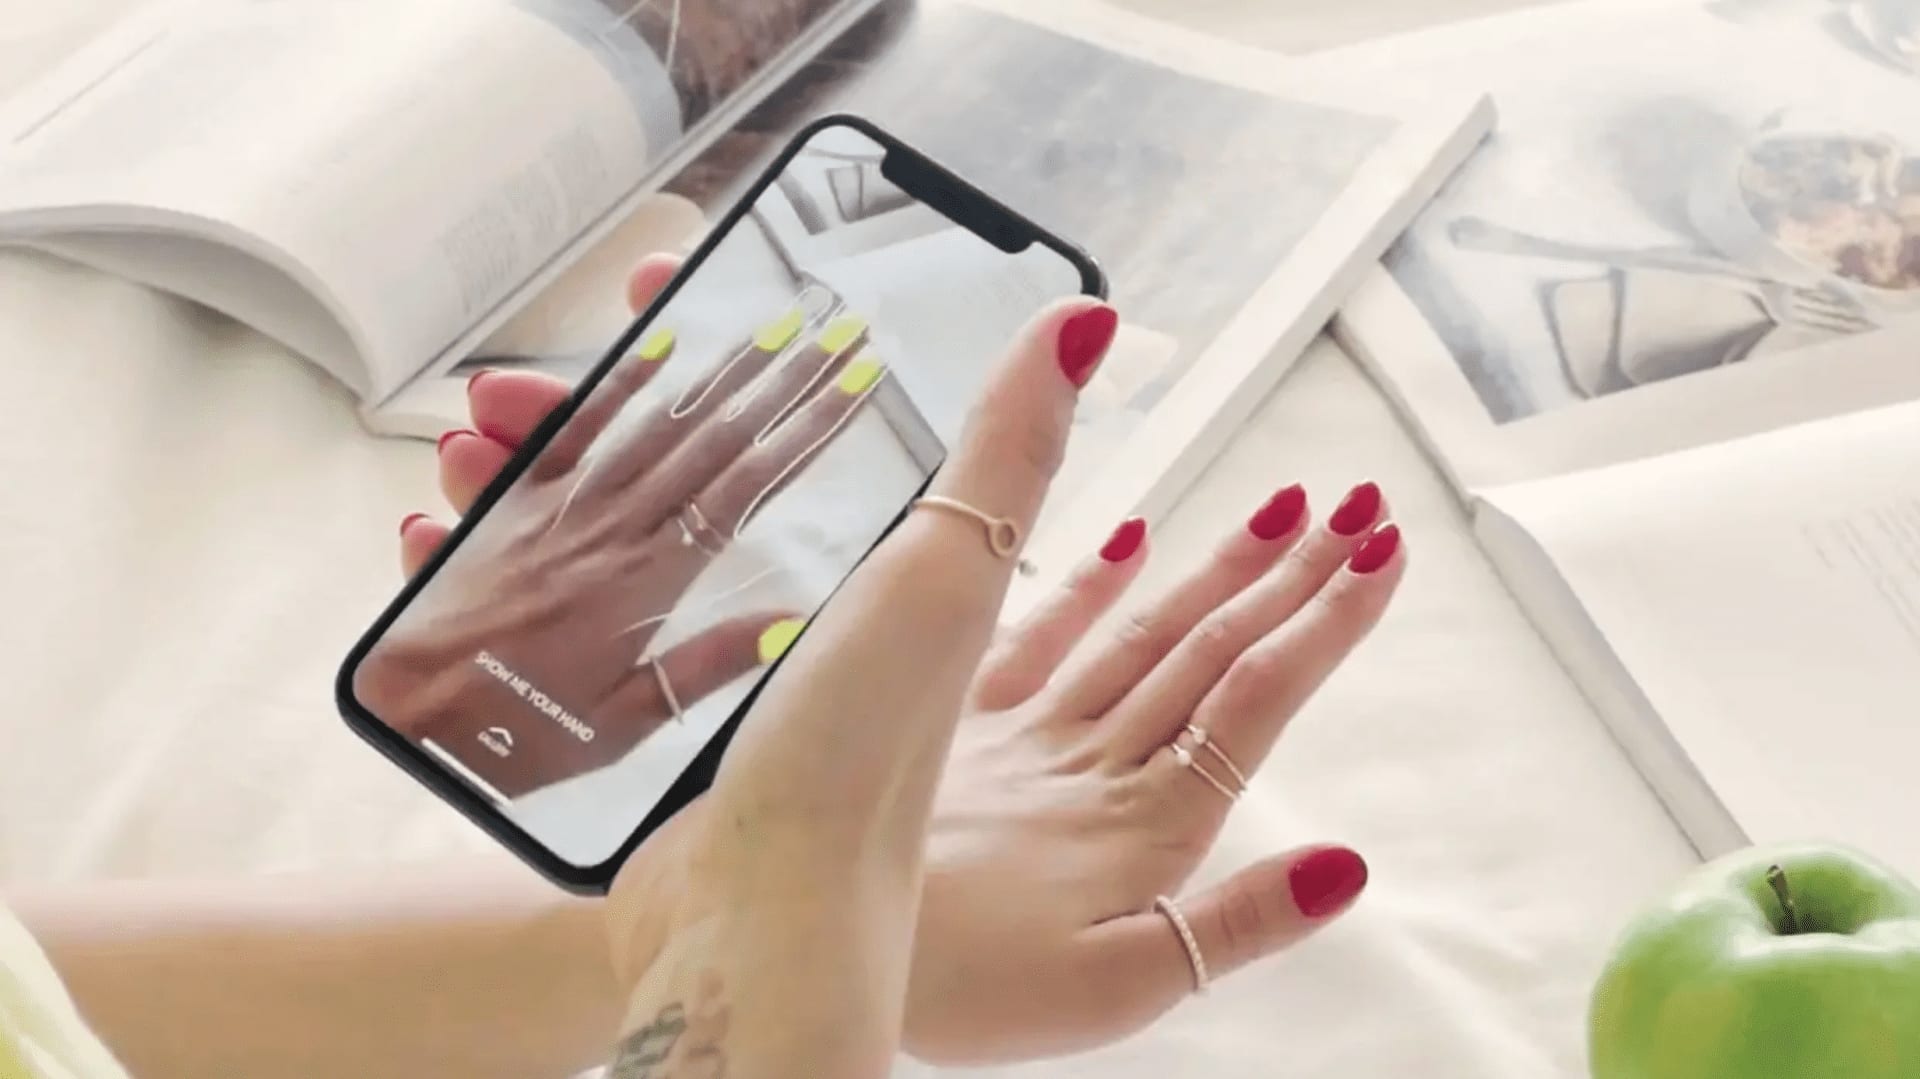 Promo Video for the mobile app WANNA Nails - SLON Media